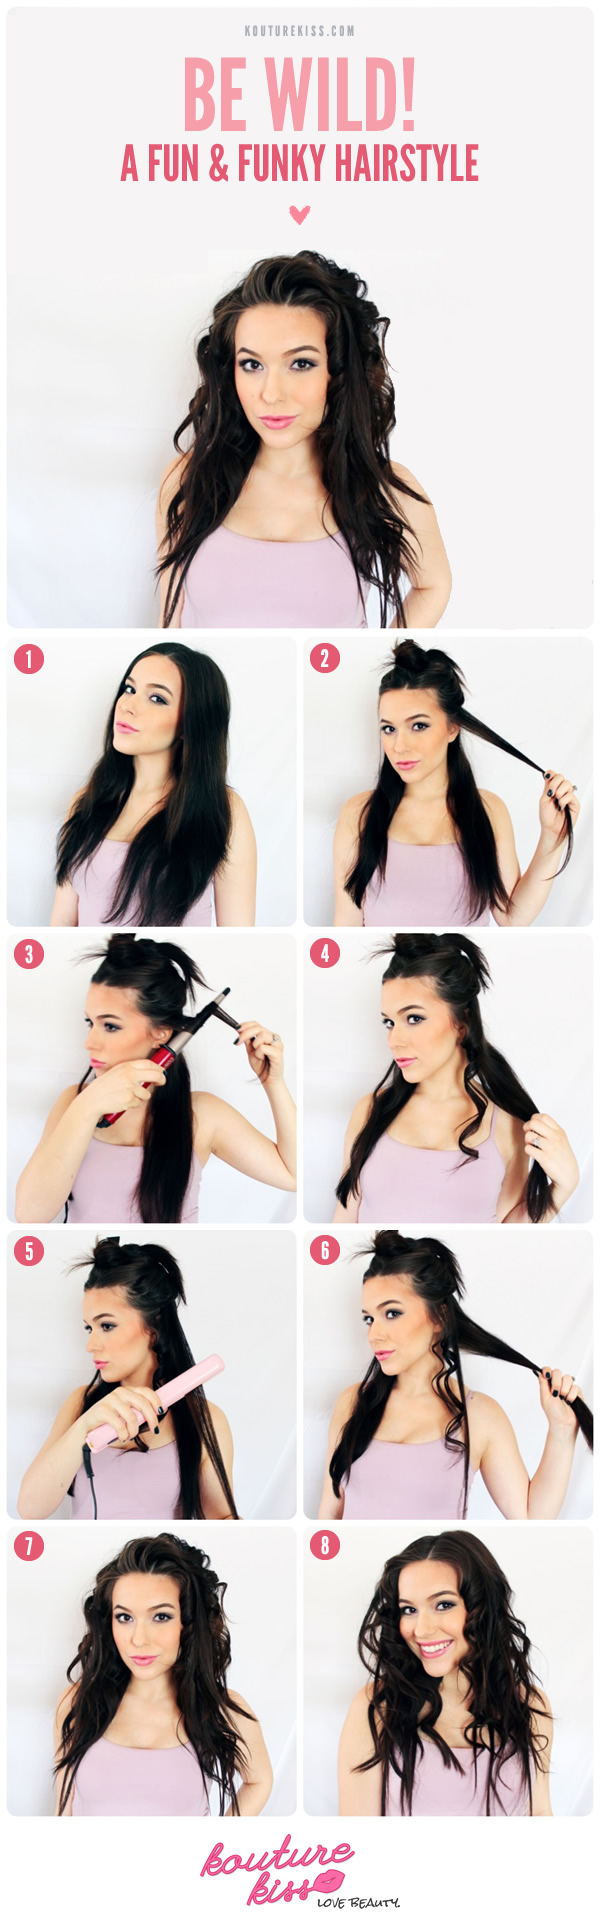 hairstyles (7)